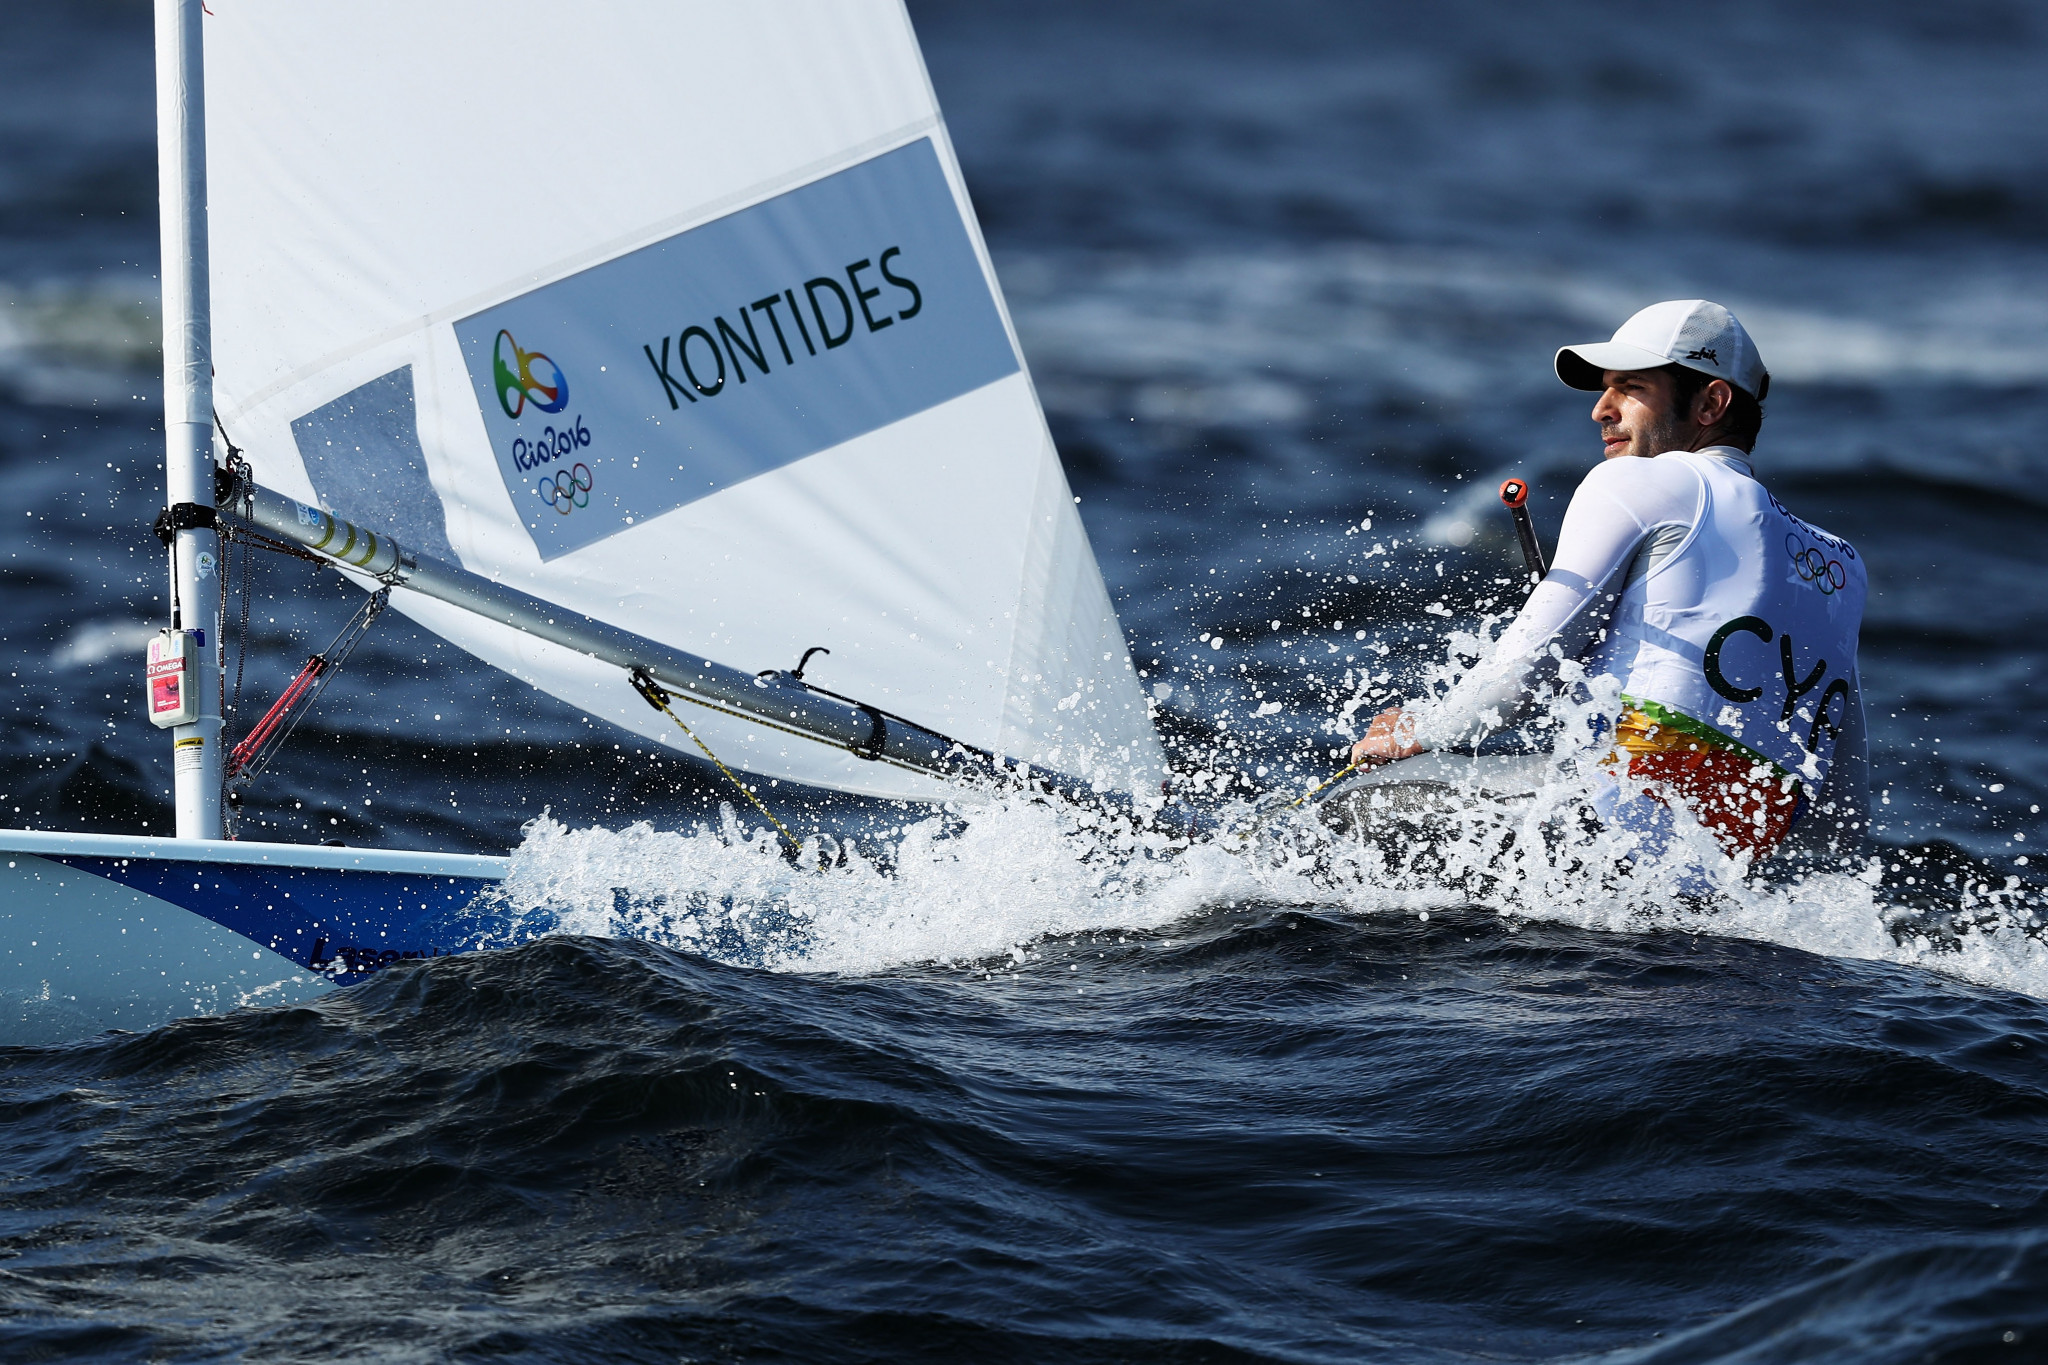 Pavlos Kontides earned Cyprus's only Olympic medal, a silver, at London 2012 in the men's laser sailing event ©Getty Images